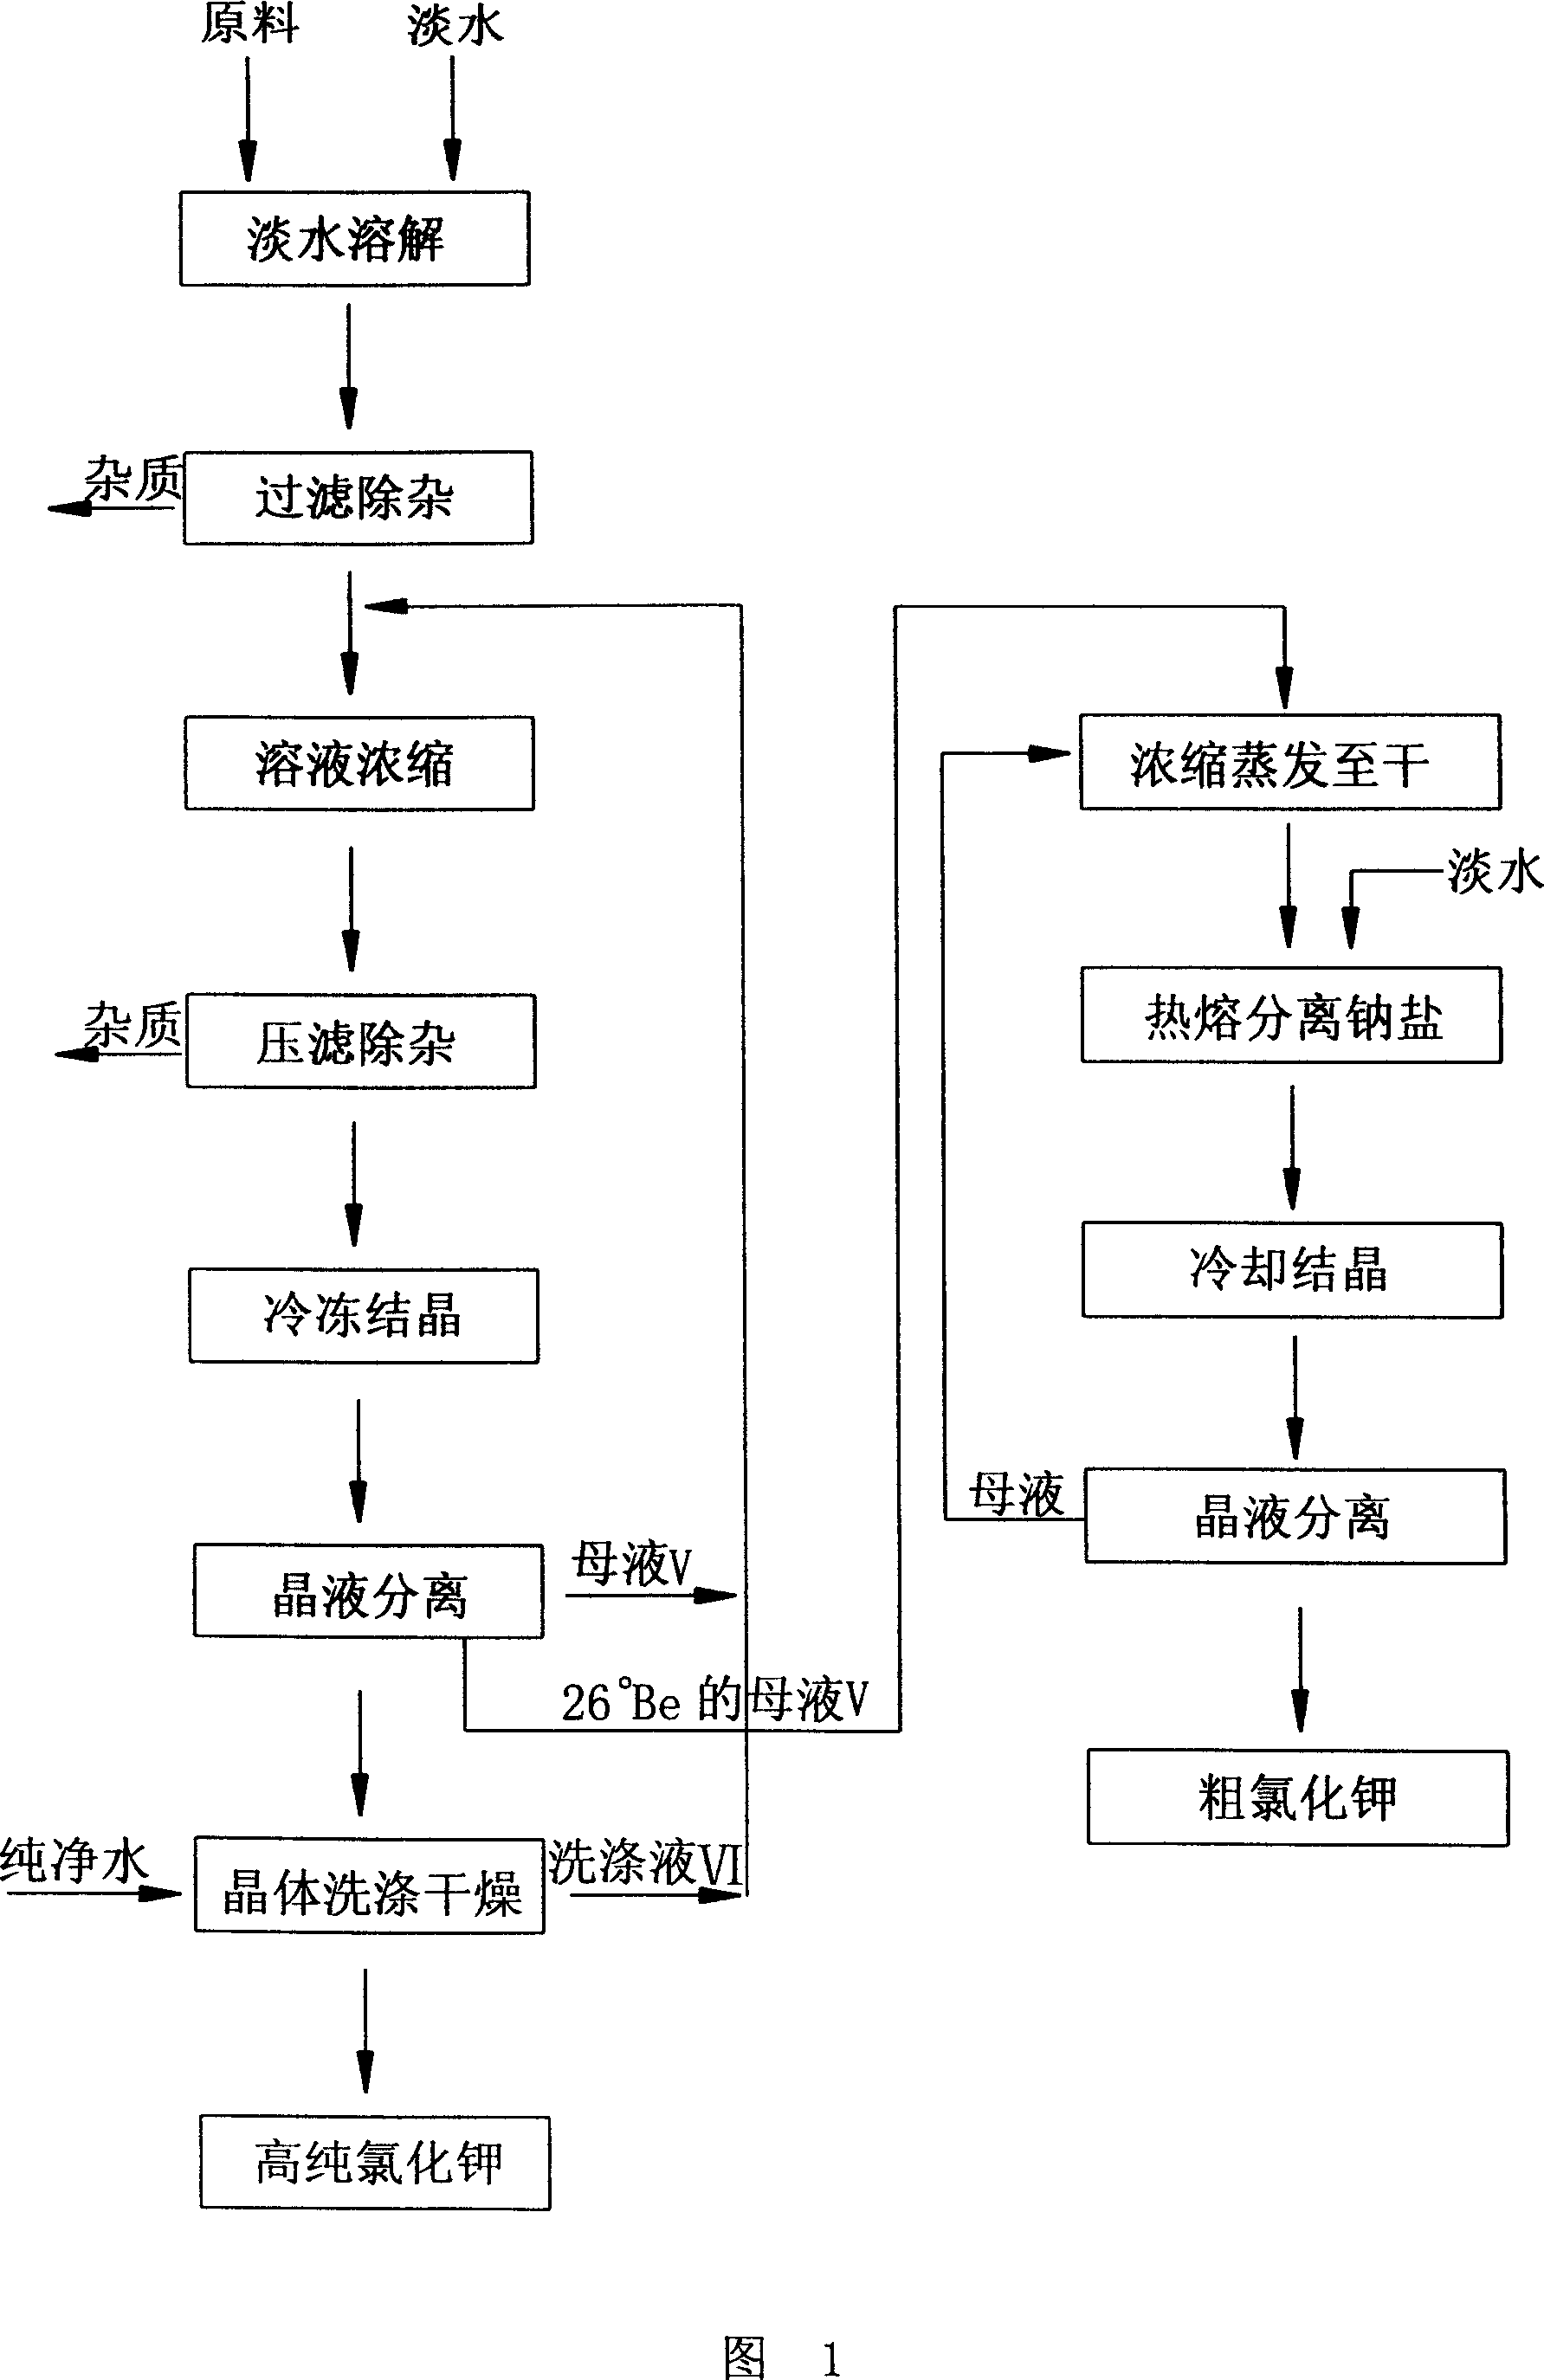 Process for producing high-purity potassium chloride